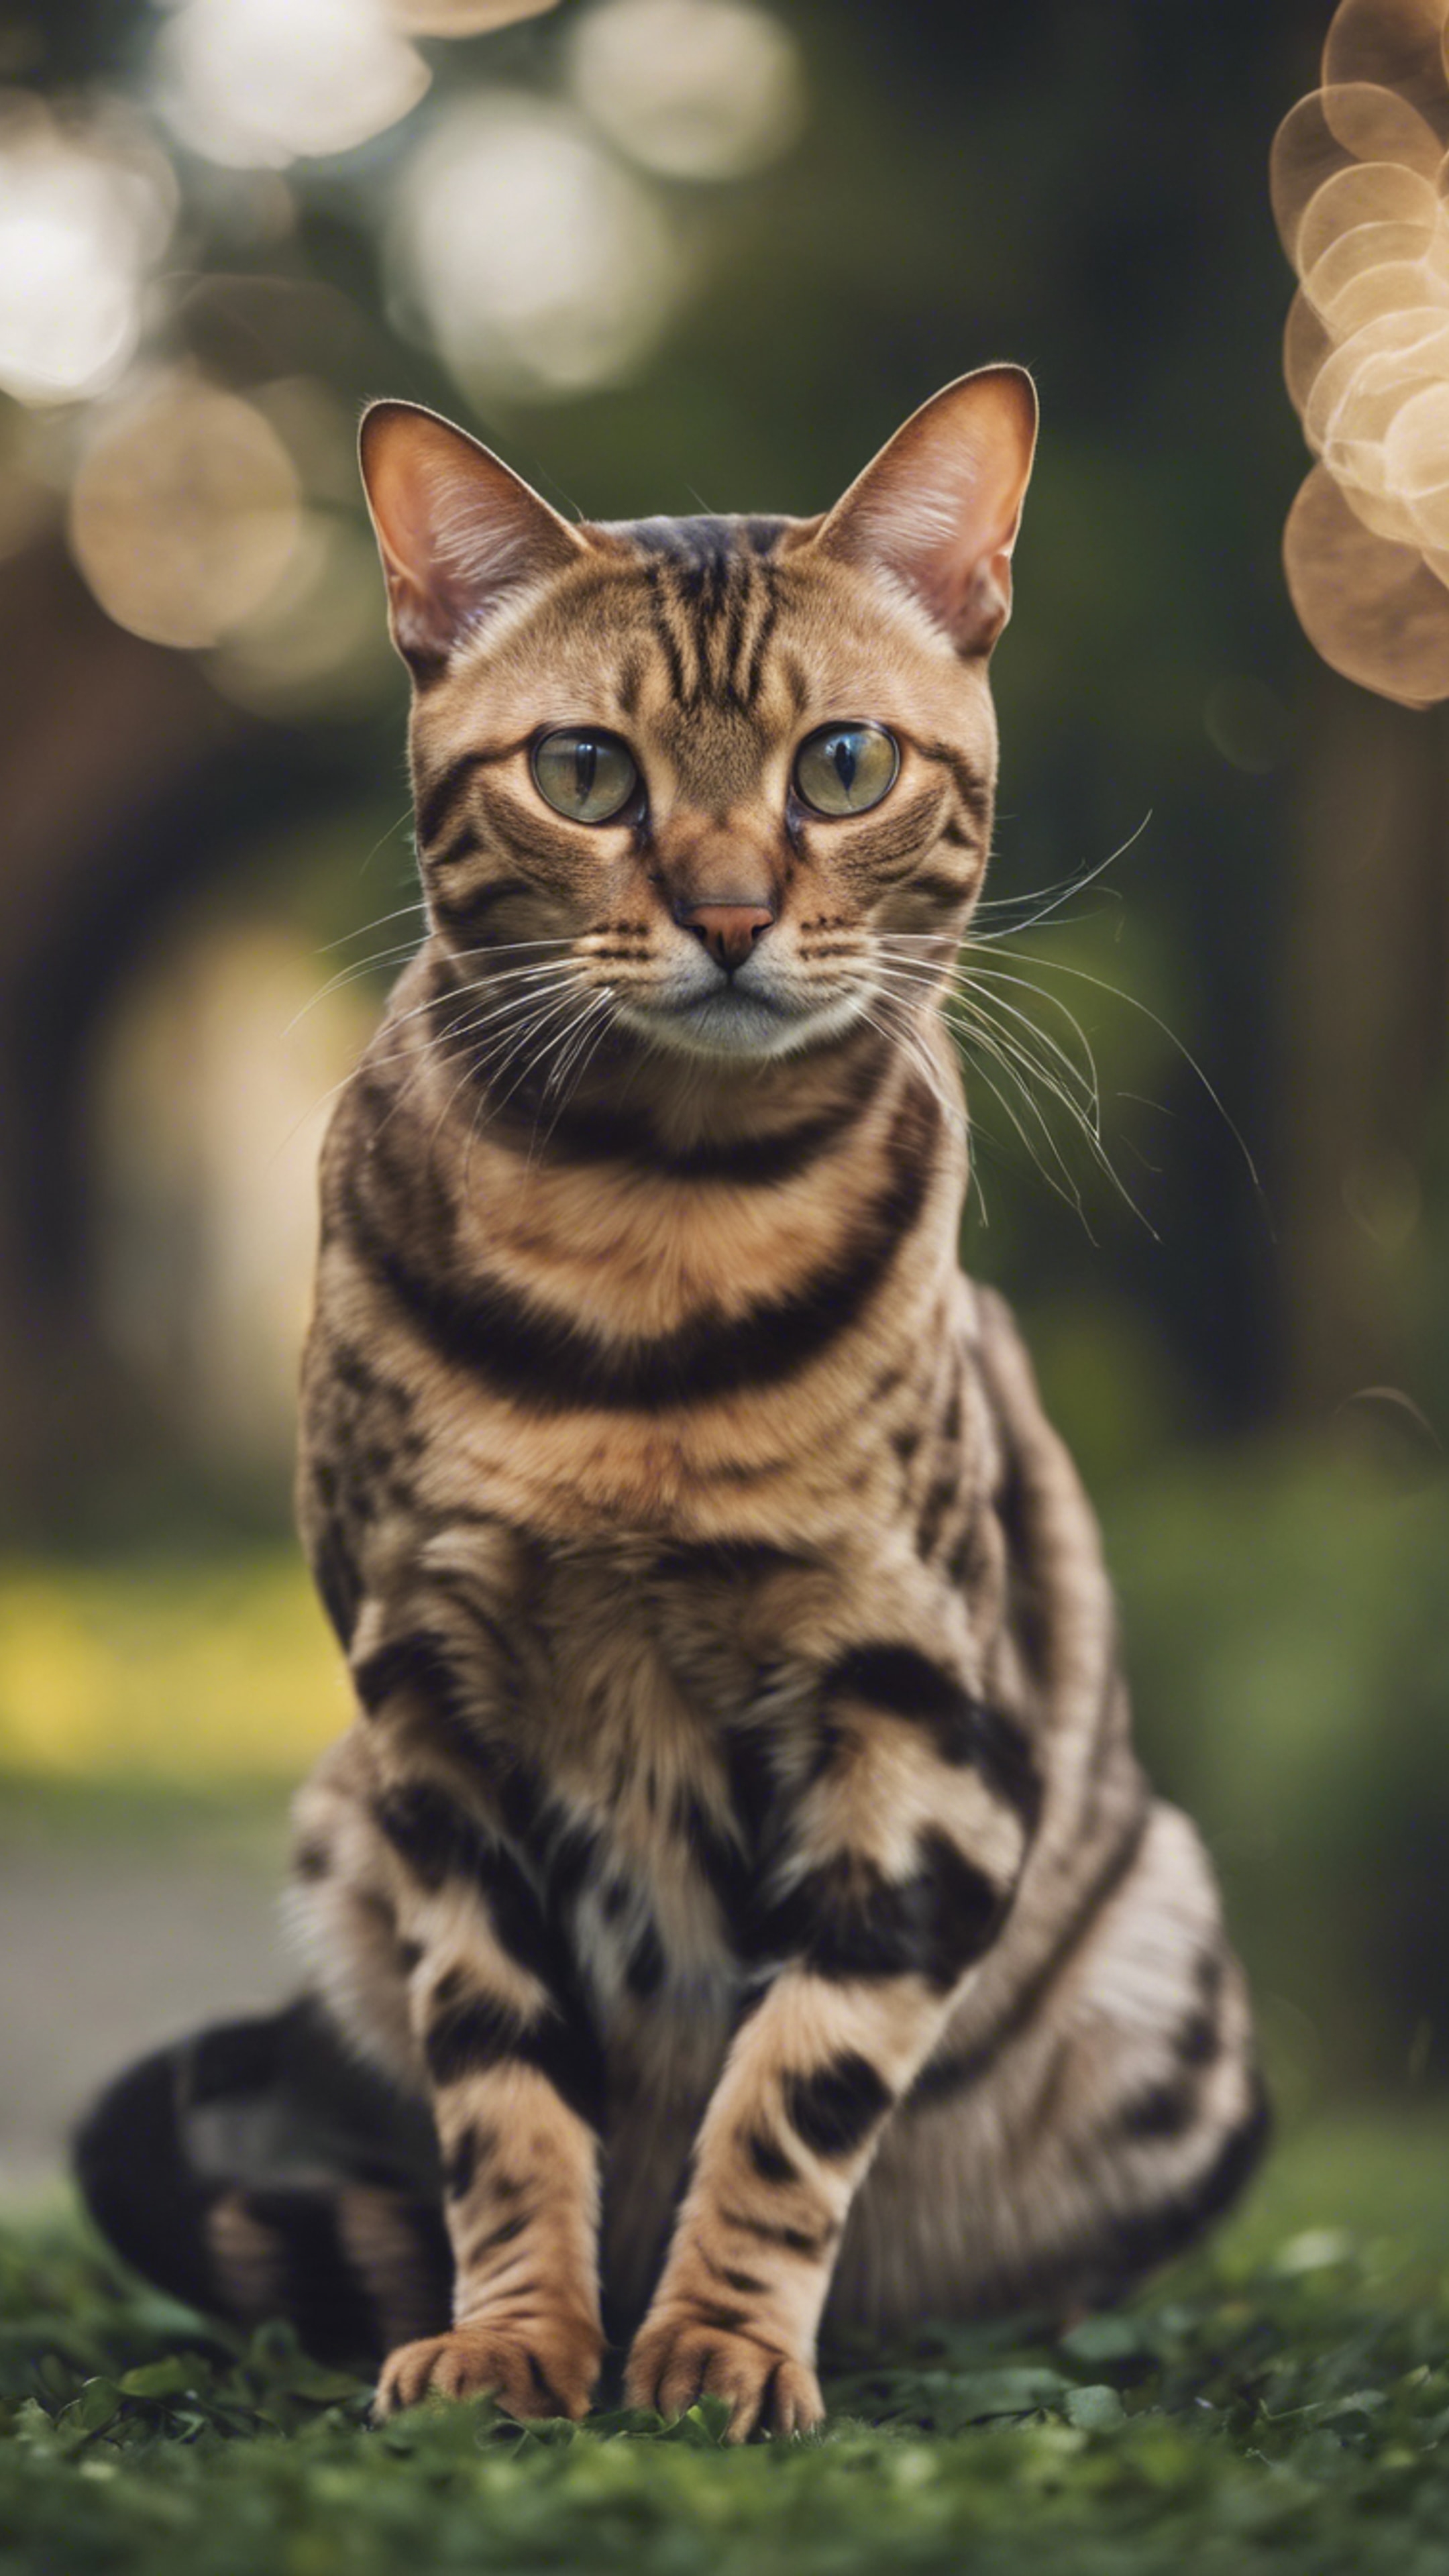 A sleek, aristocratic Bengal cat royally ignoring a mouse scampering by.壁紙[9f7ab84a7c6b485a8696]